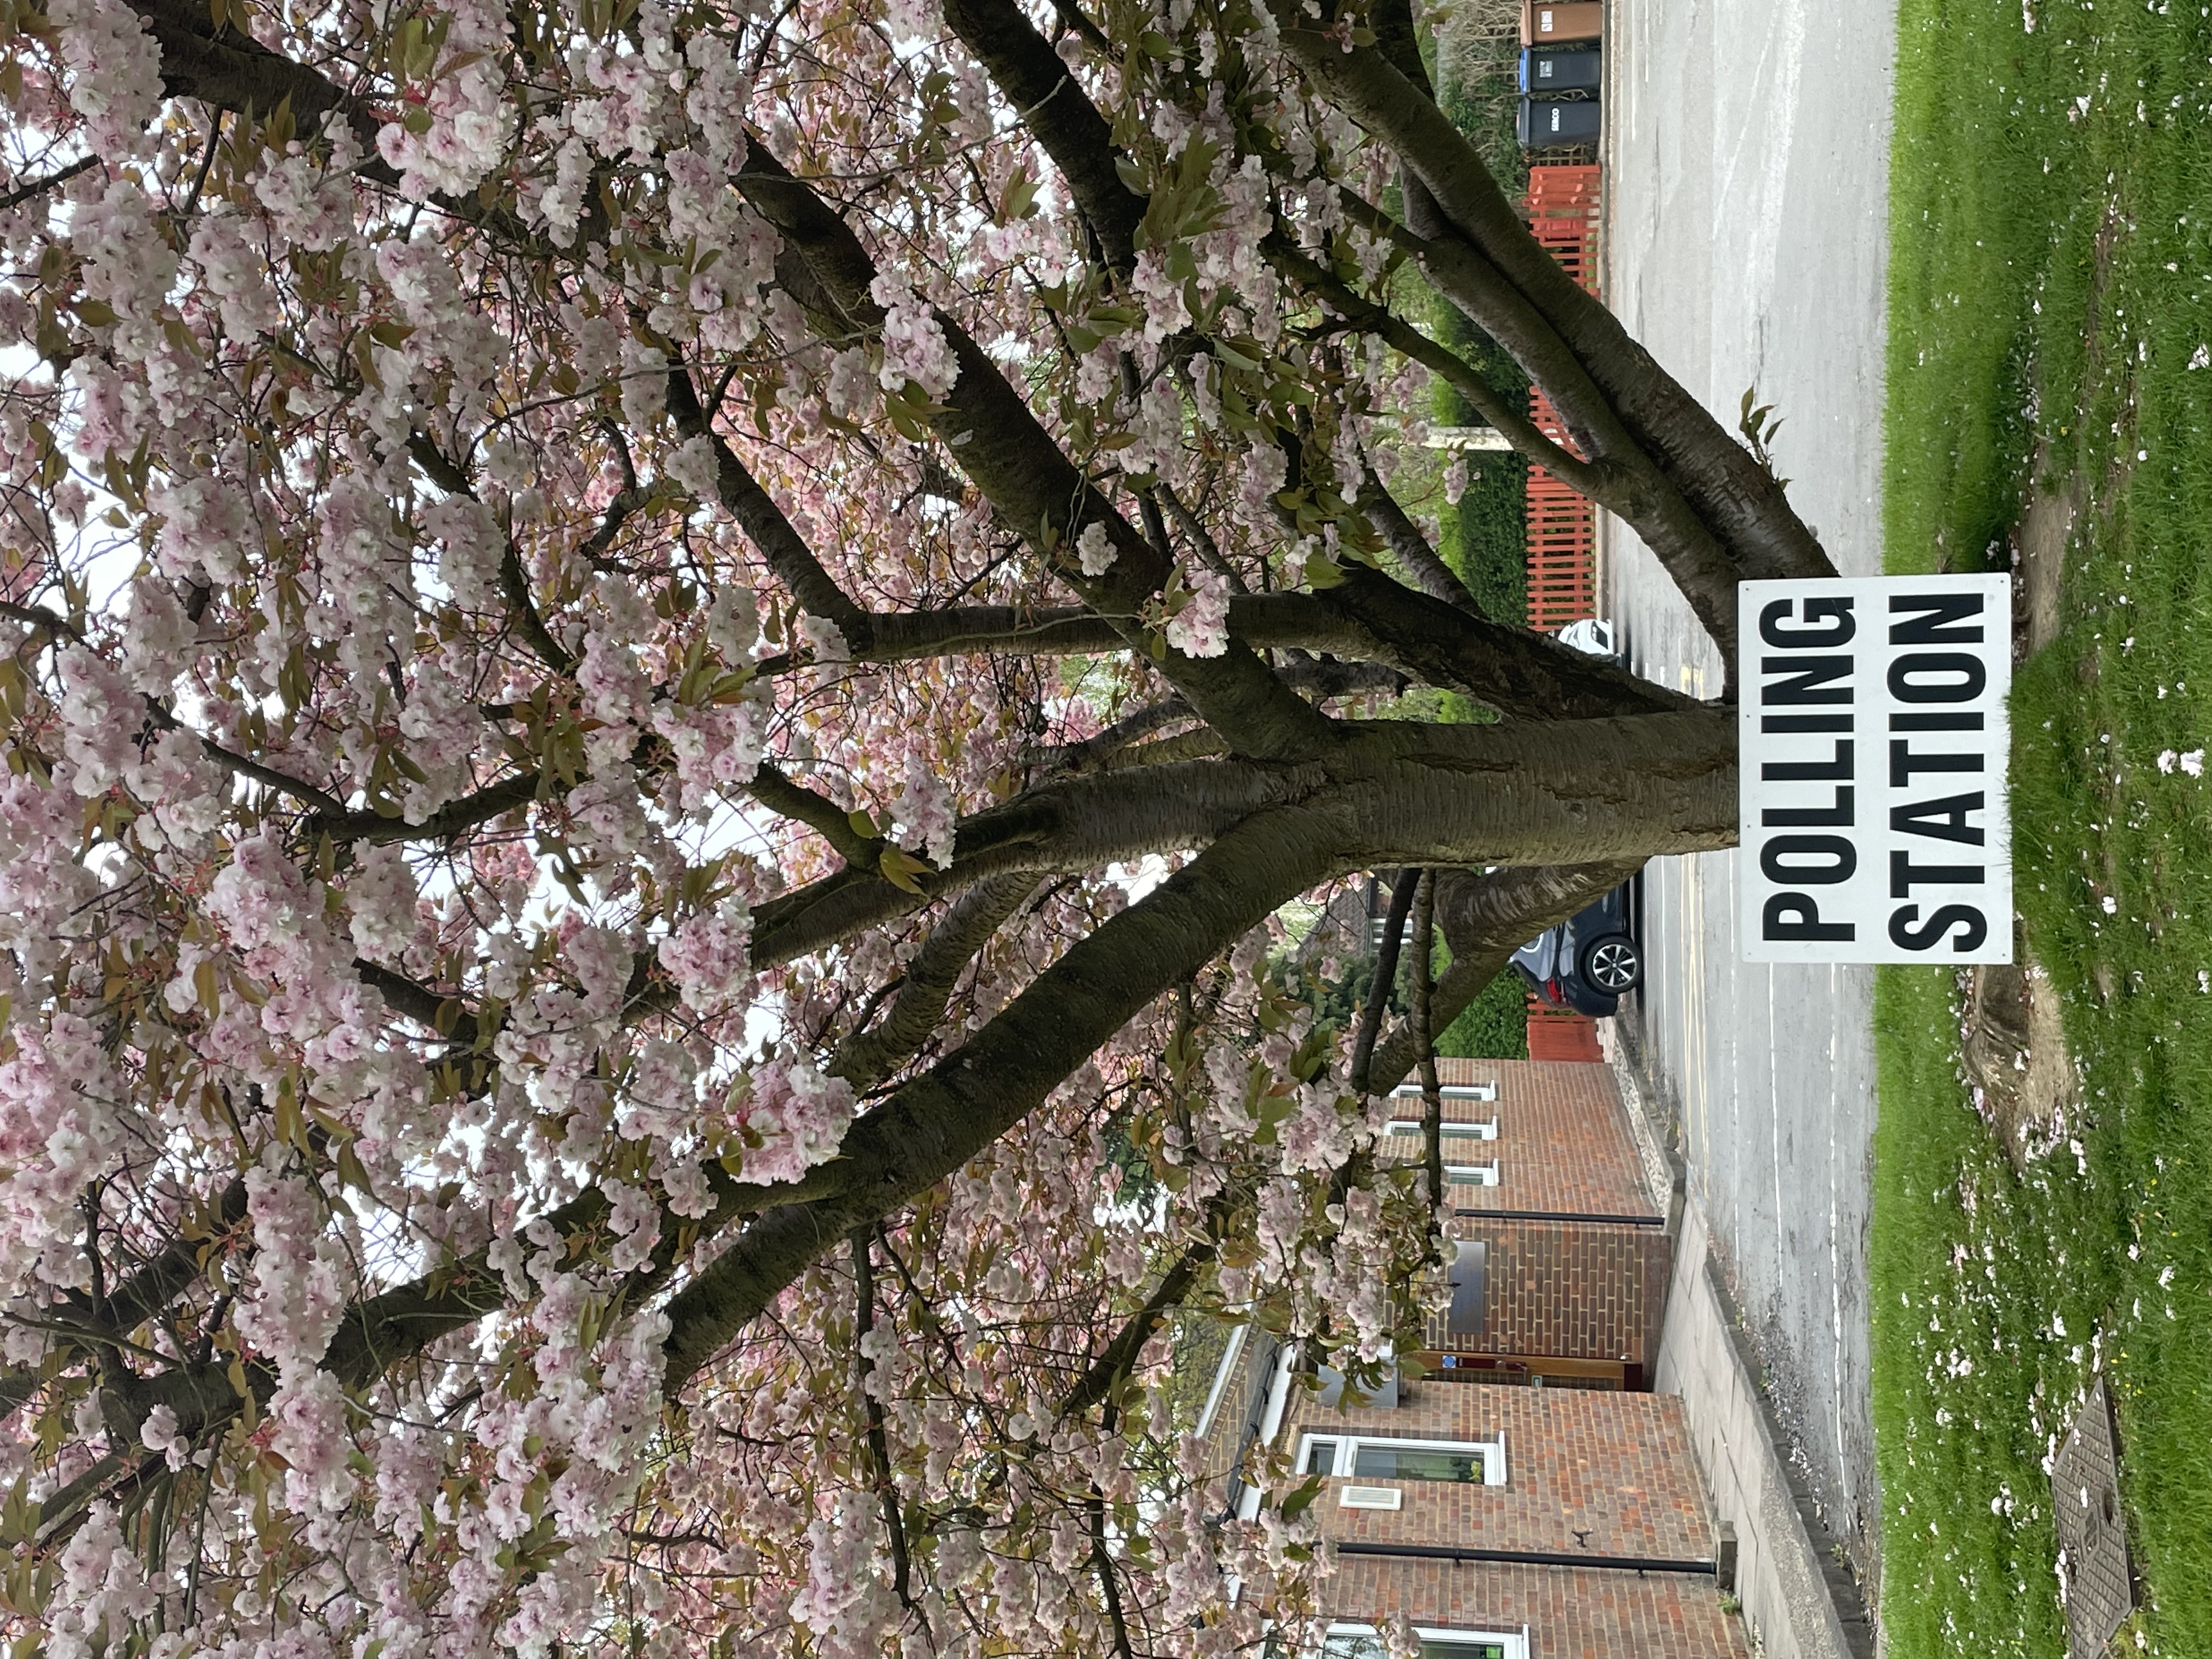 blossom tree with polling station sign underneath